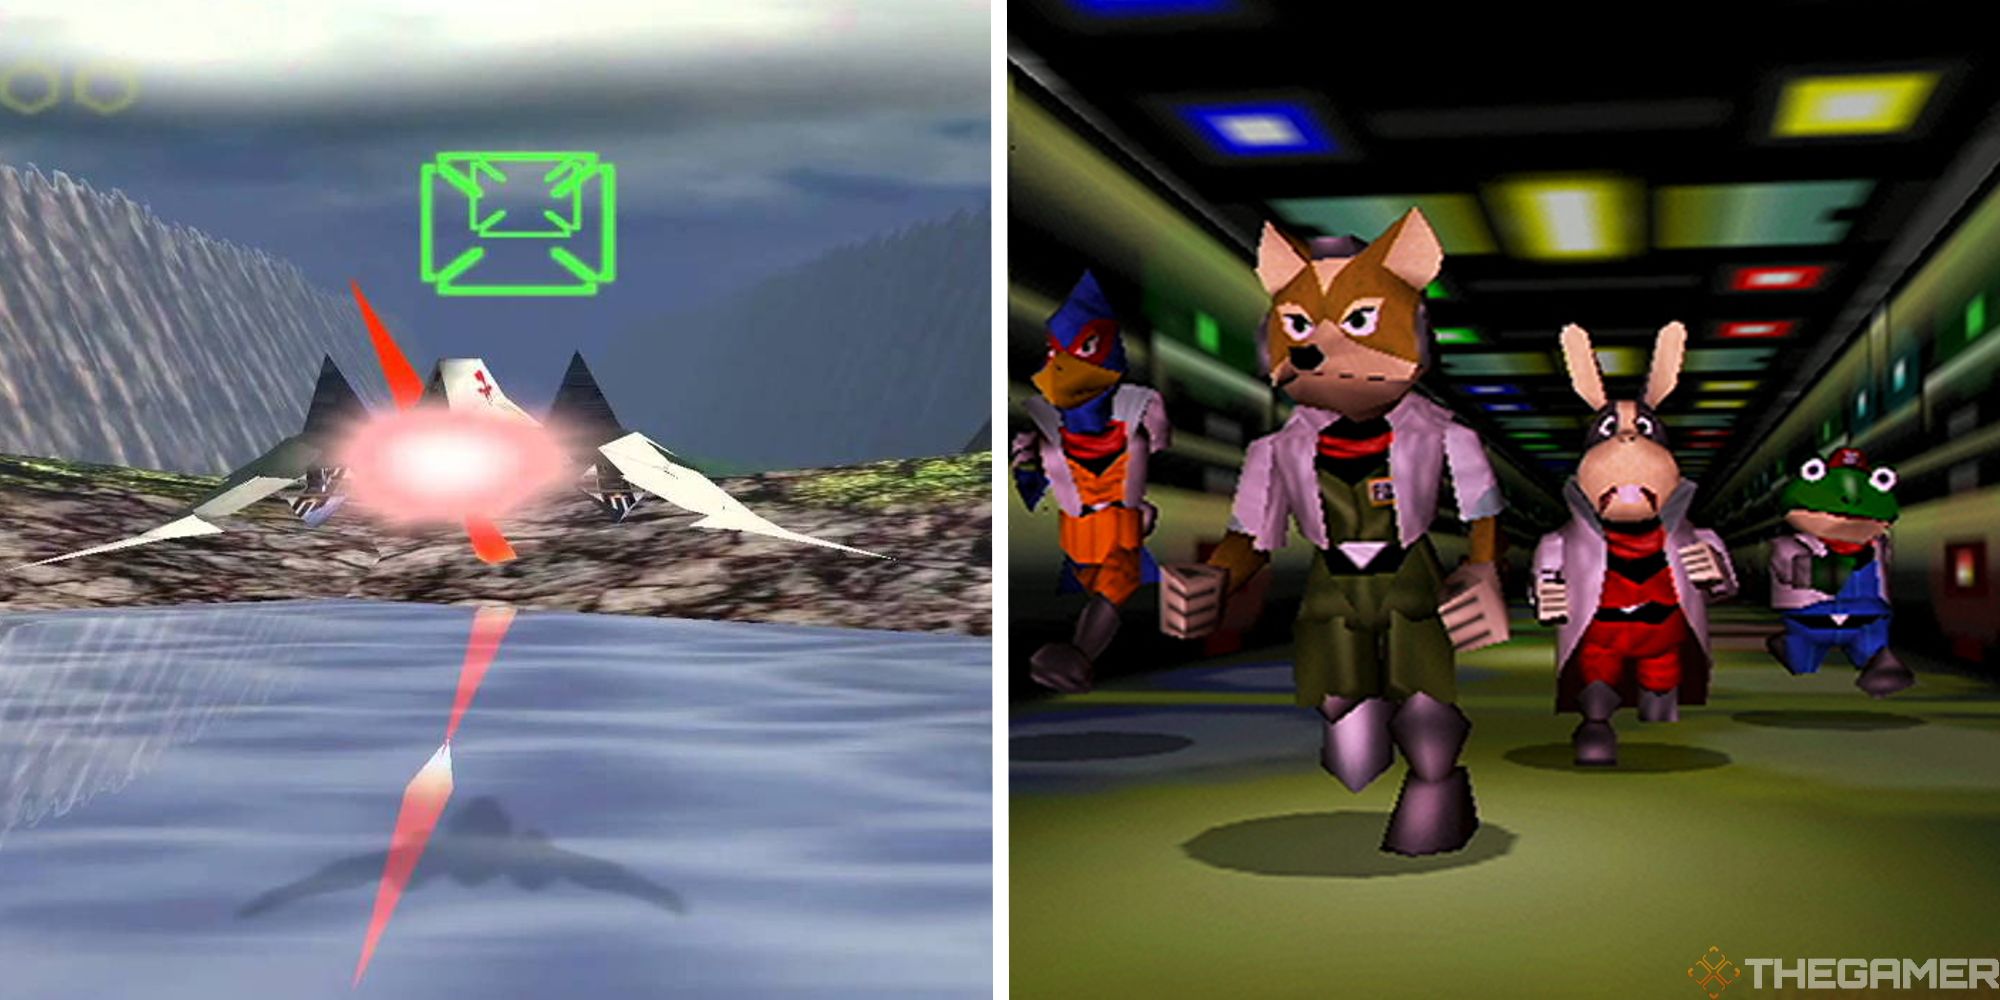 split image showing arwing next to image of characters walking forward